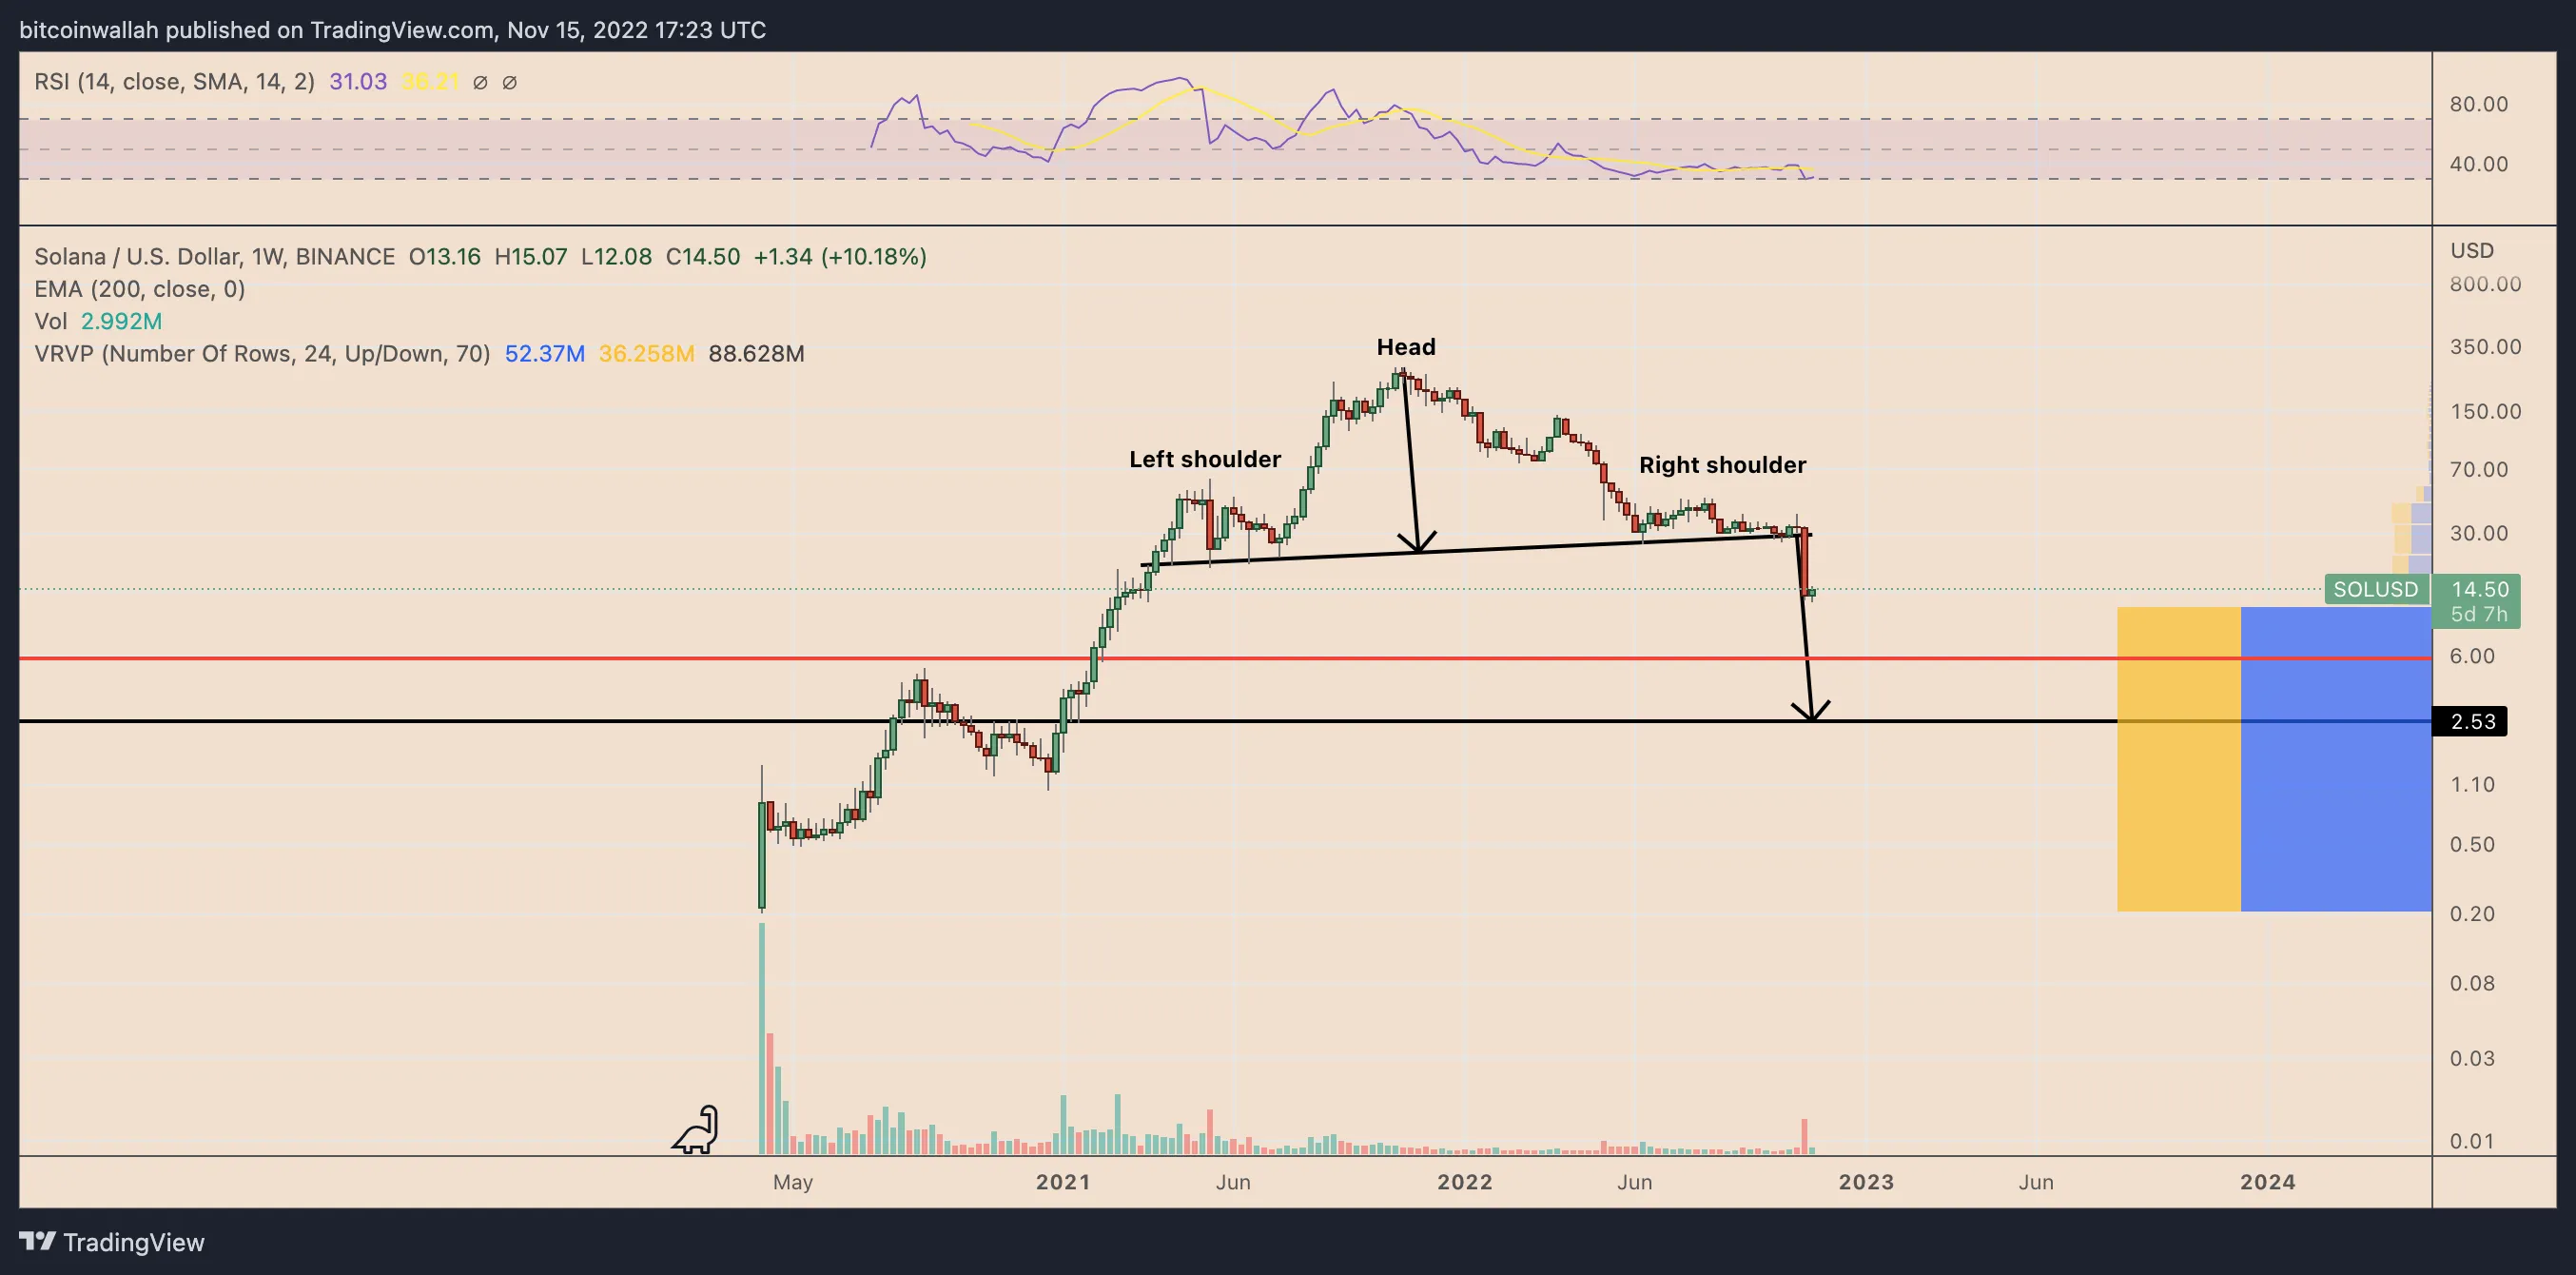 SOL/USD weekly price chart featuring head-and-shoulder breakdown setup. Source: TradingView